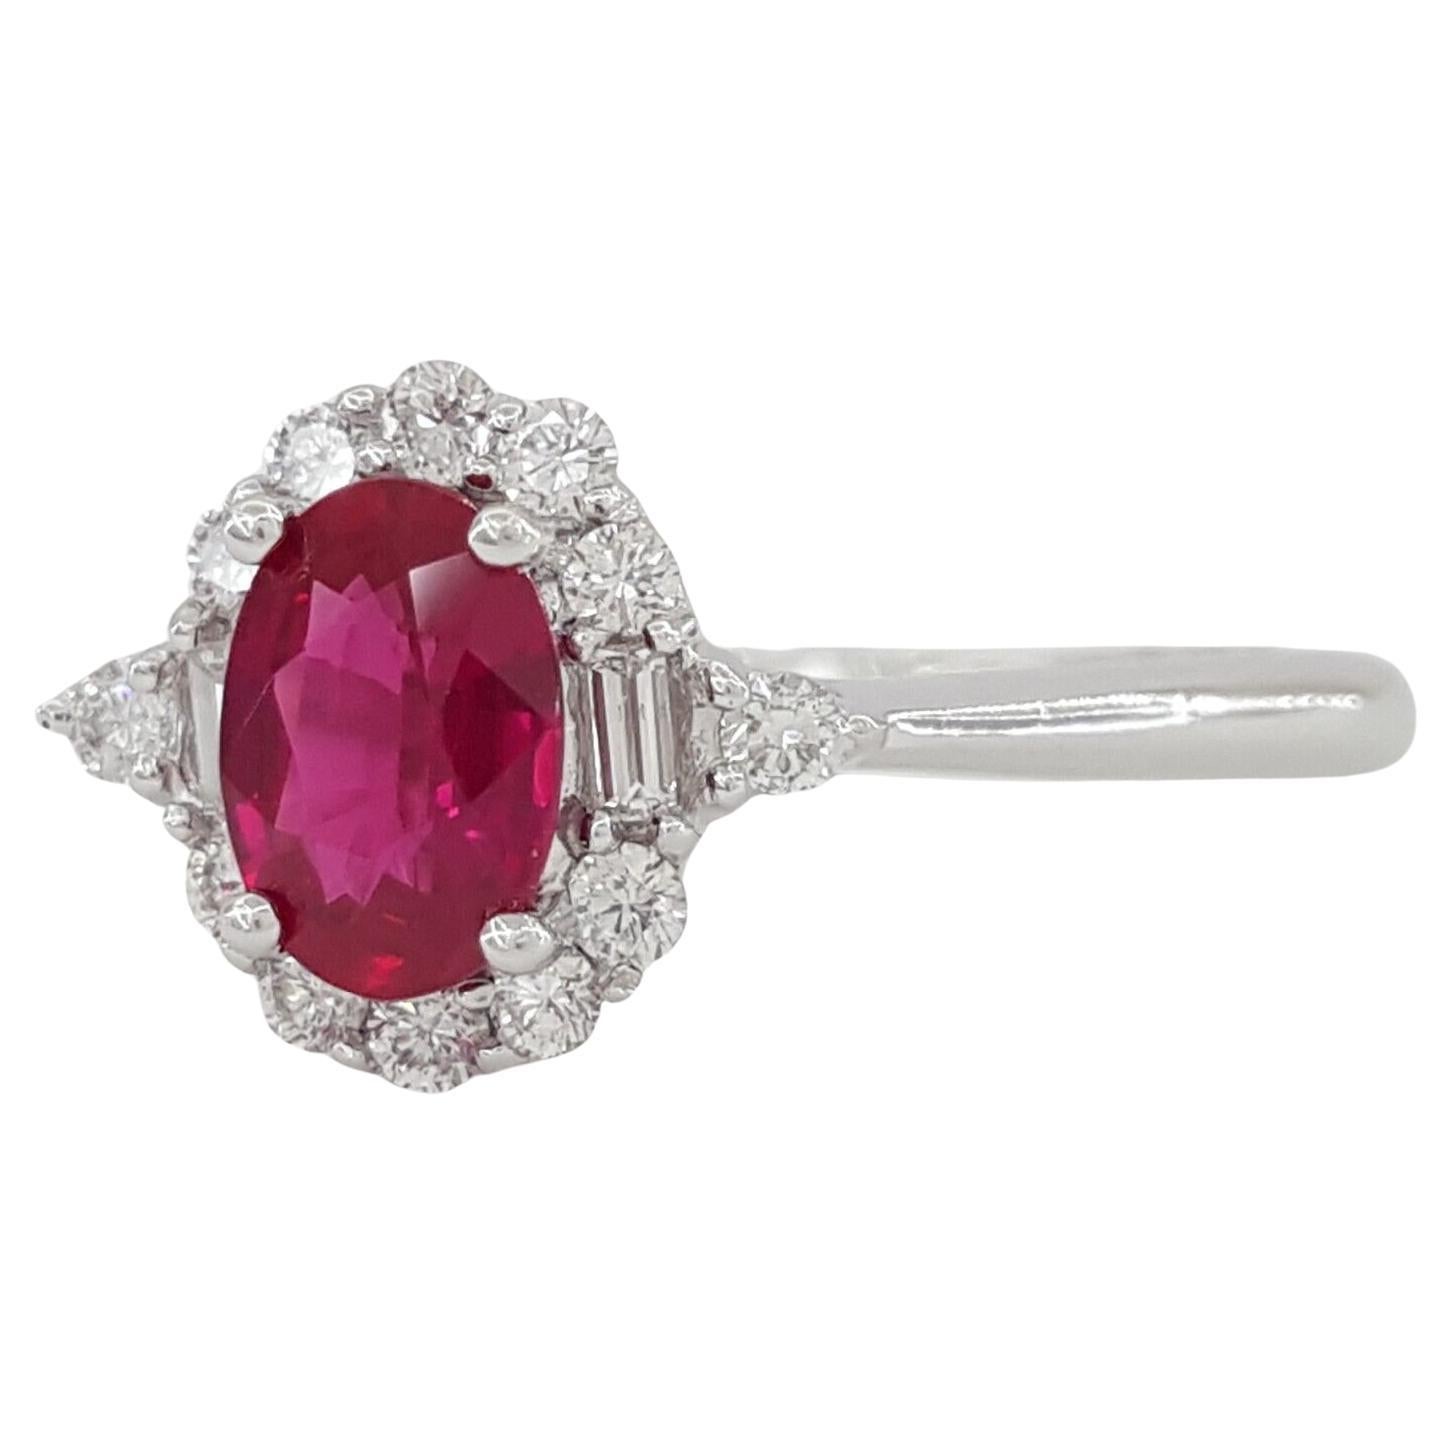 Oval Cut Ruby, Baguette & Round Brilliant Cut Diamond Halo Engagement Ring Set in 14k White Gold .



The ring weighs 2.1 grams, size 4.75, the center is a Natural Oval Brilliant Cut Natural Red Ruby weighing ~0.47 ct.



There are 2 Natural